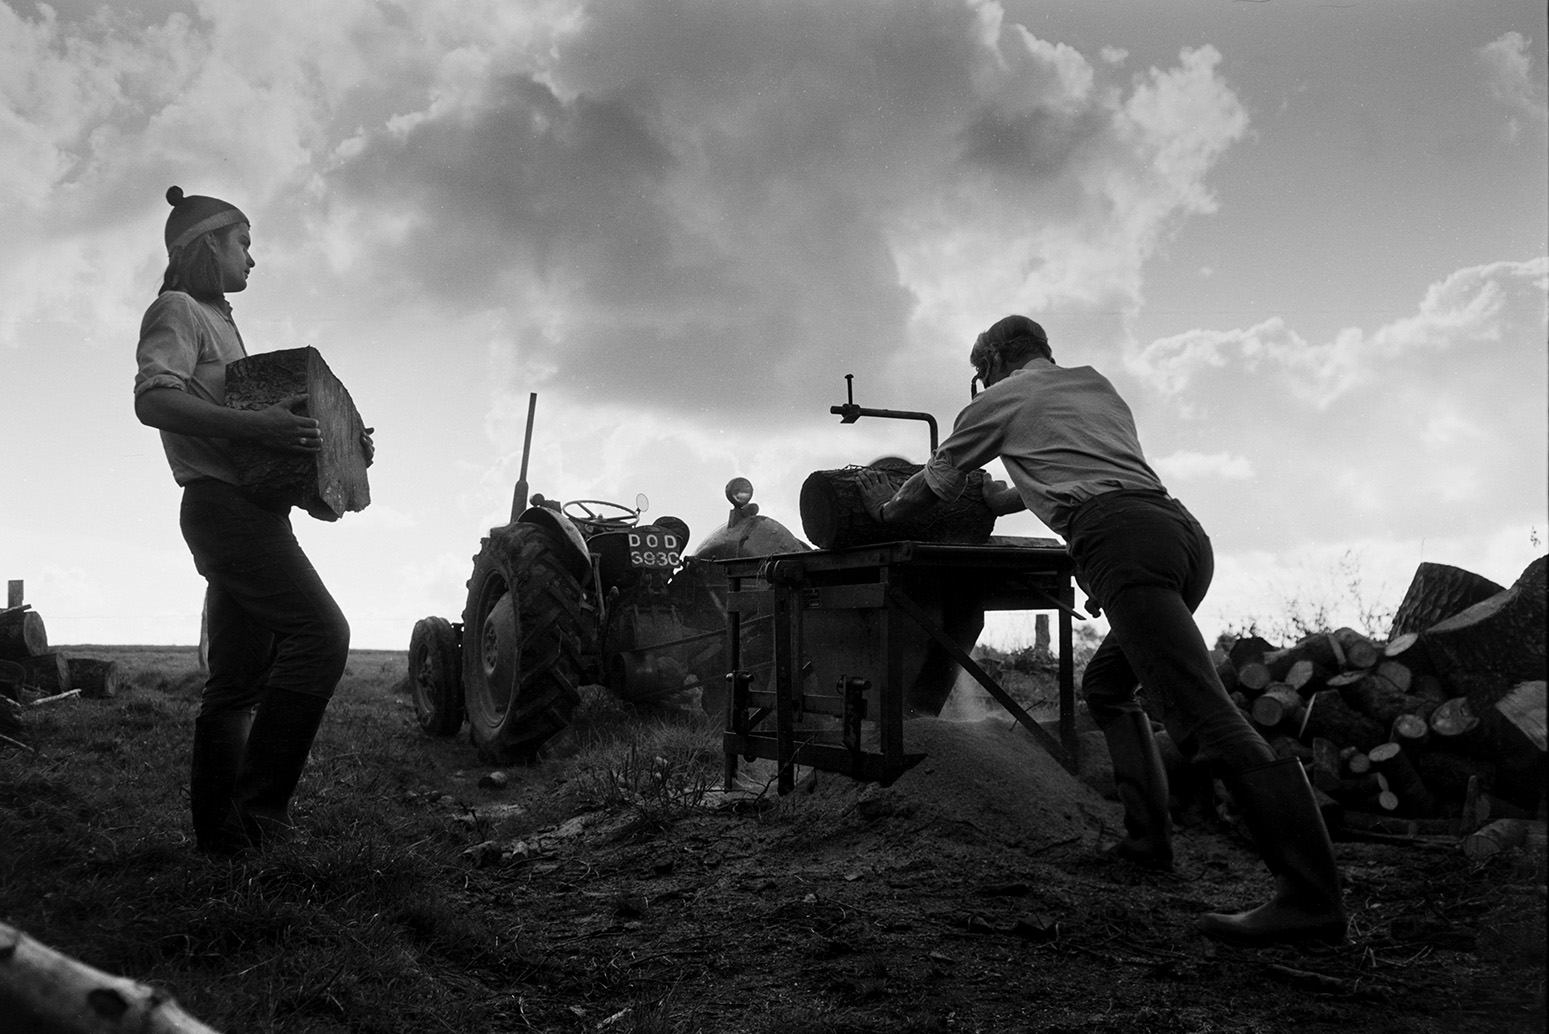 Derek Bright, on the left, helping Ivor Bourne saw logs with a circular saw, in a field at Mill Road Farm, Beaford. They are using a tractor to drive the saw. The farm was also known as Jeffrys.